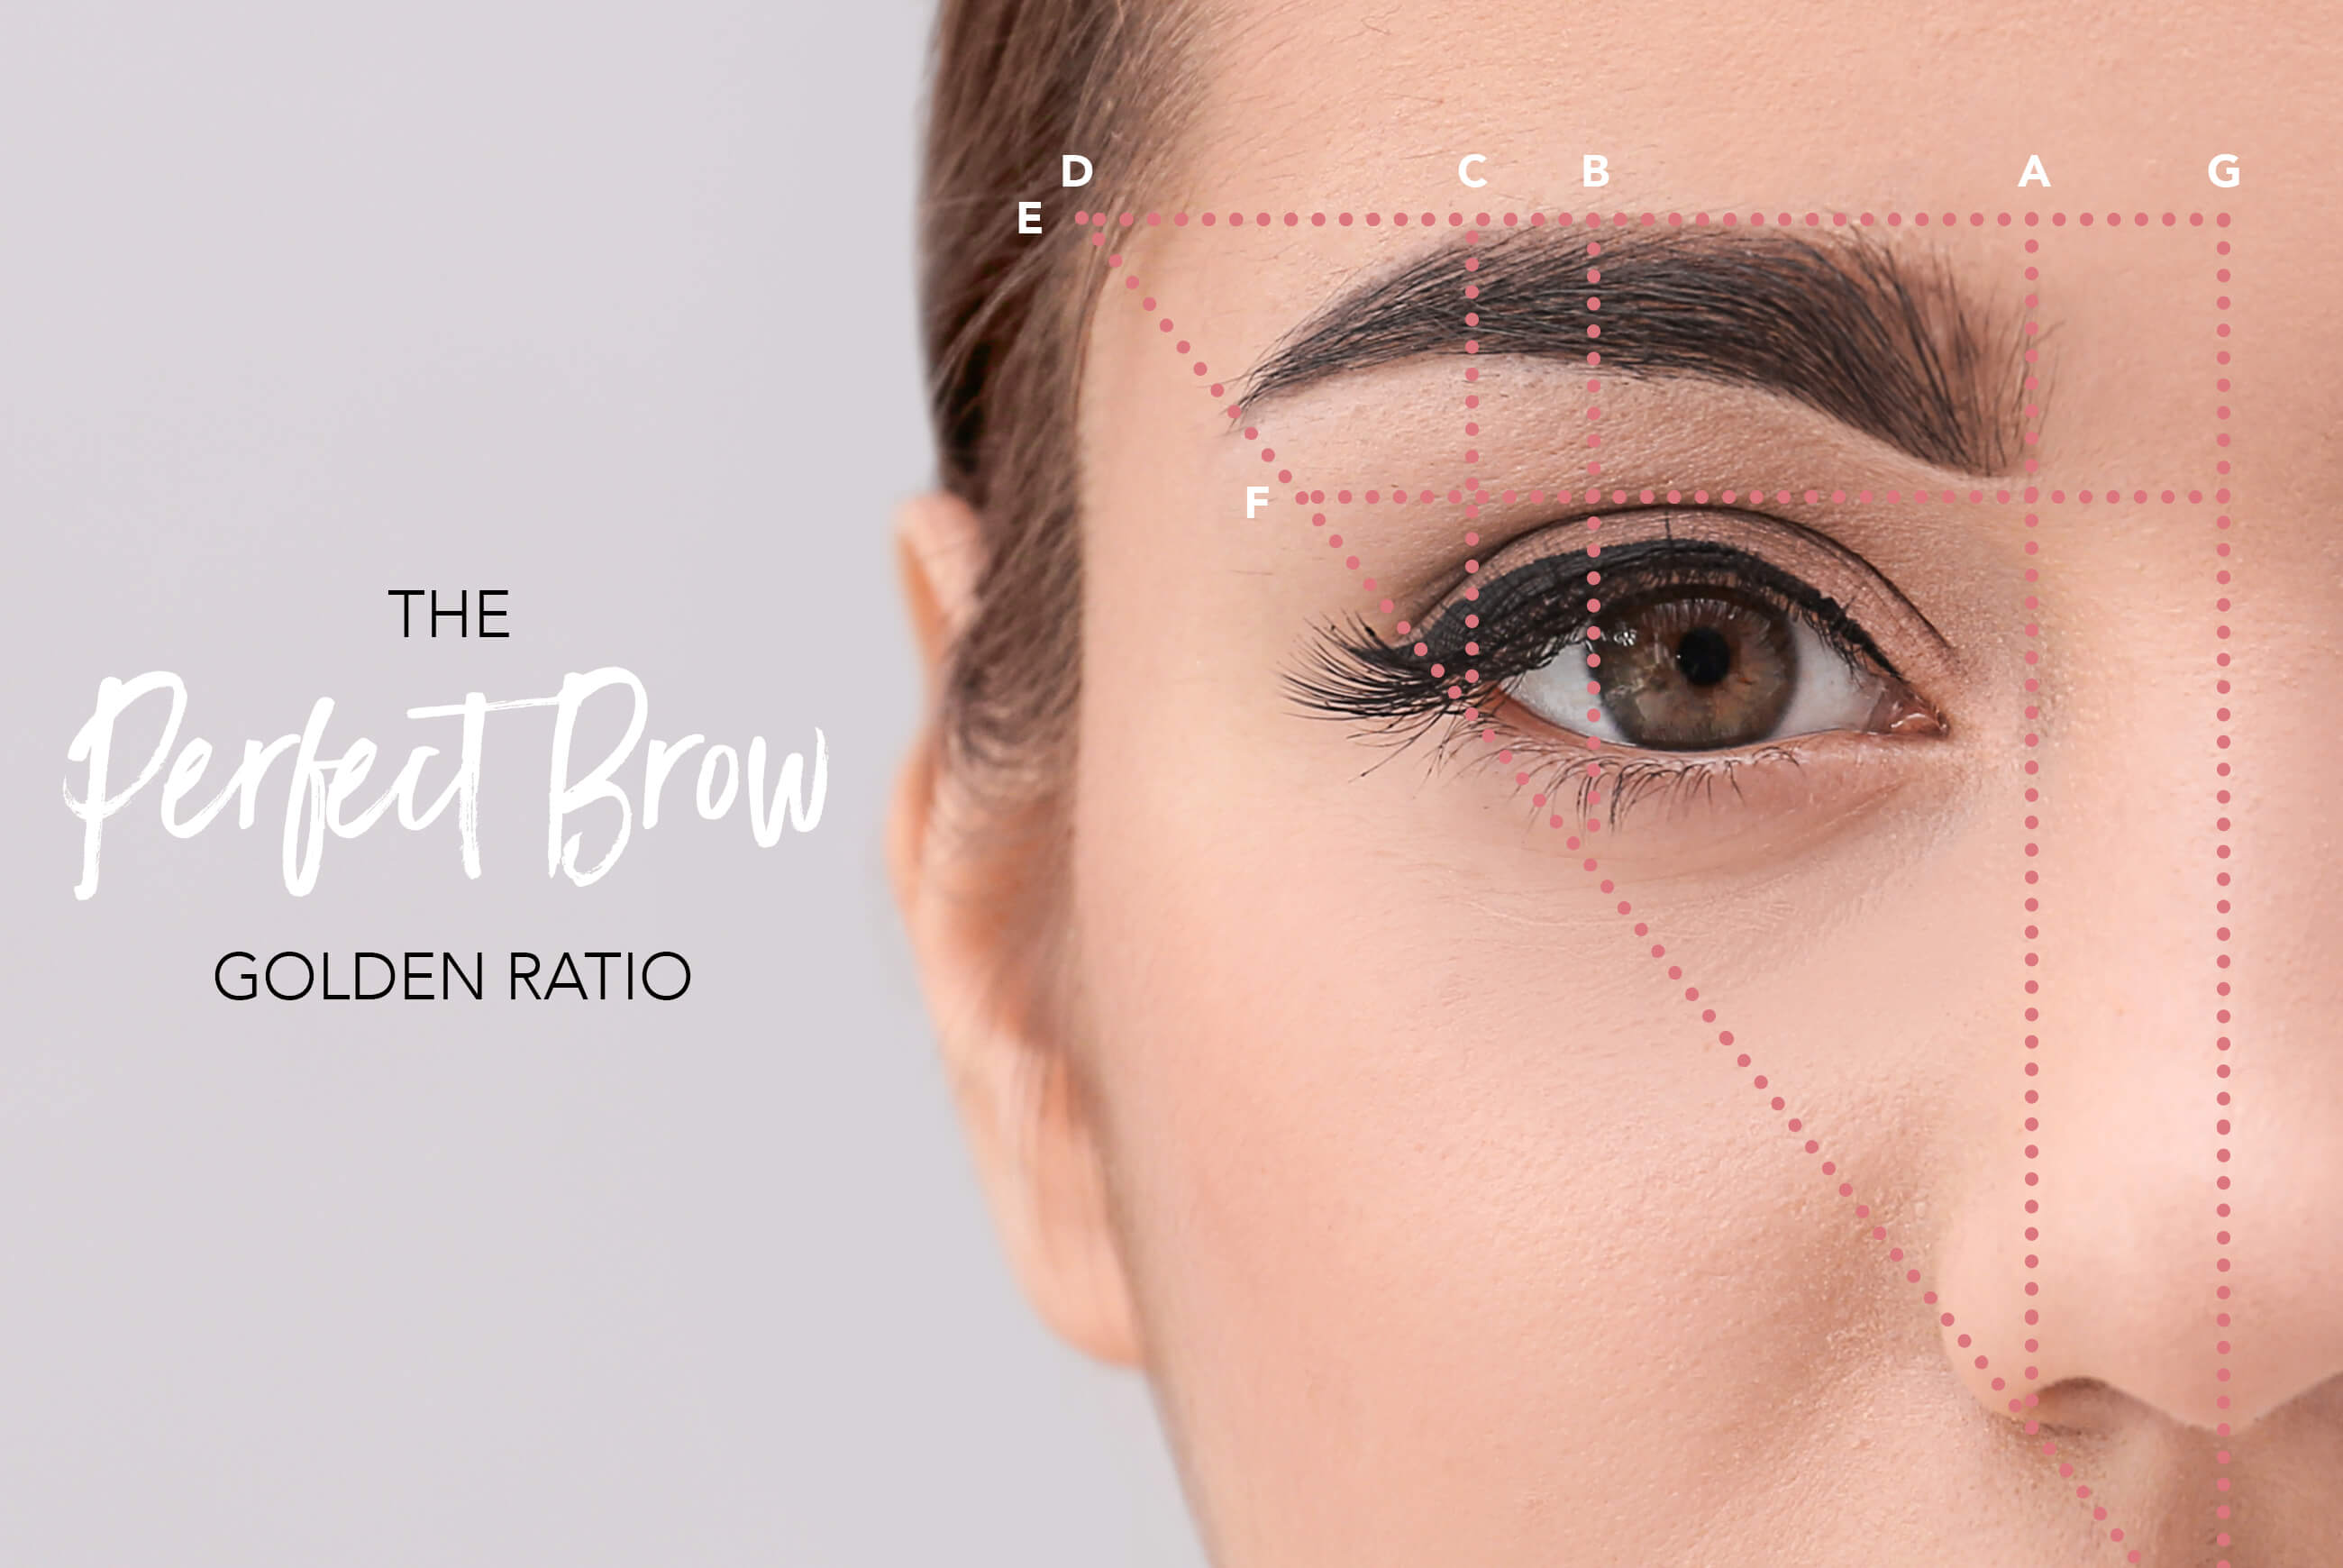 The Perfect Brow Golden Ratio